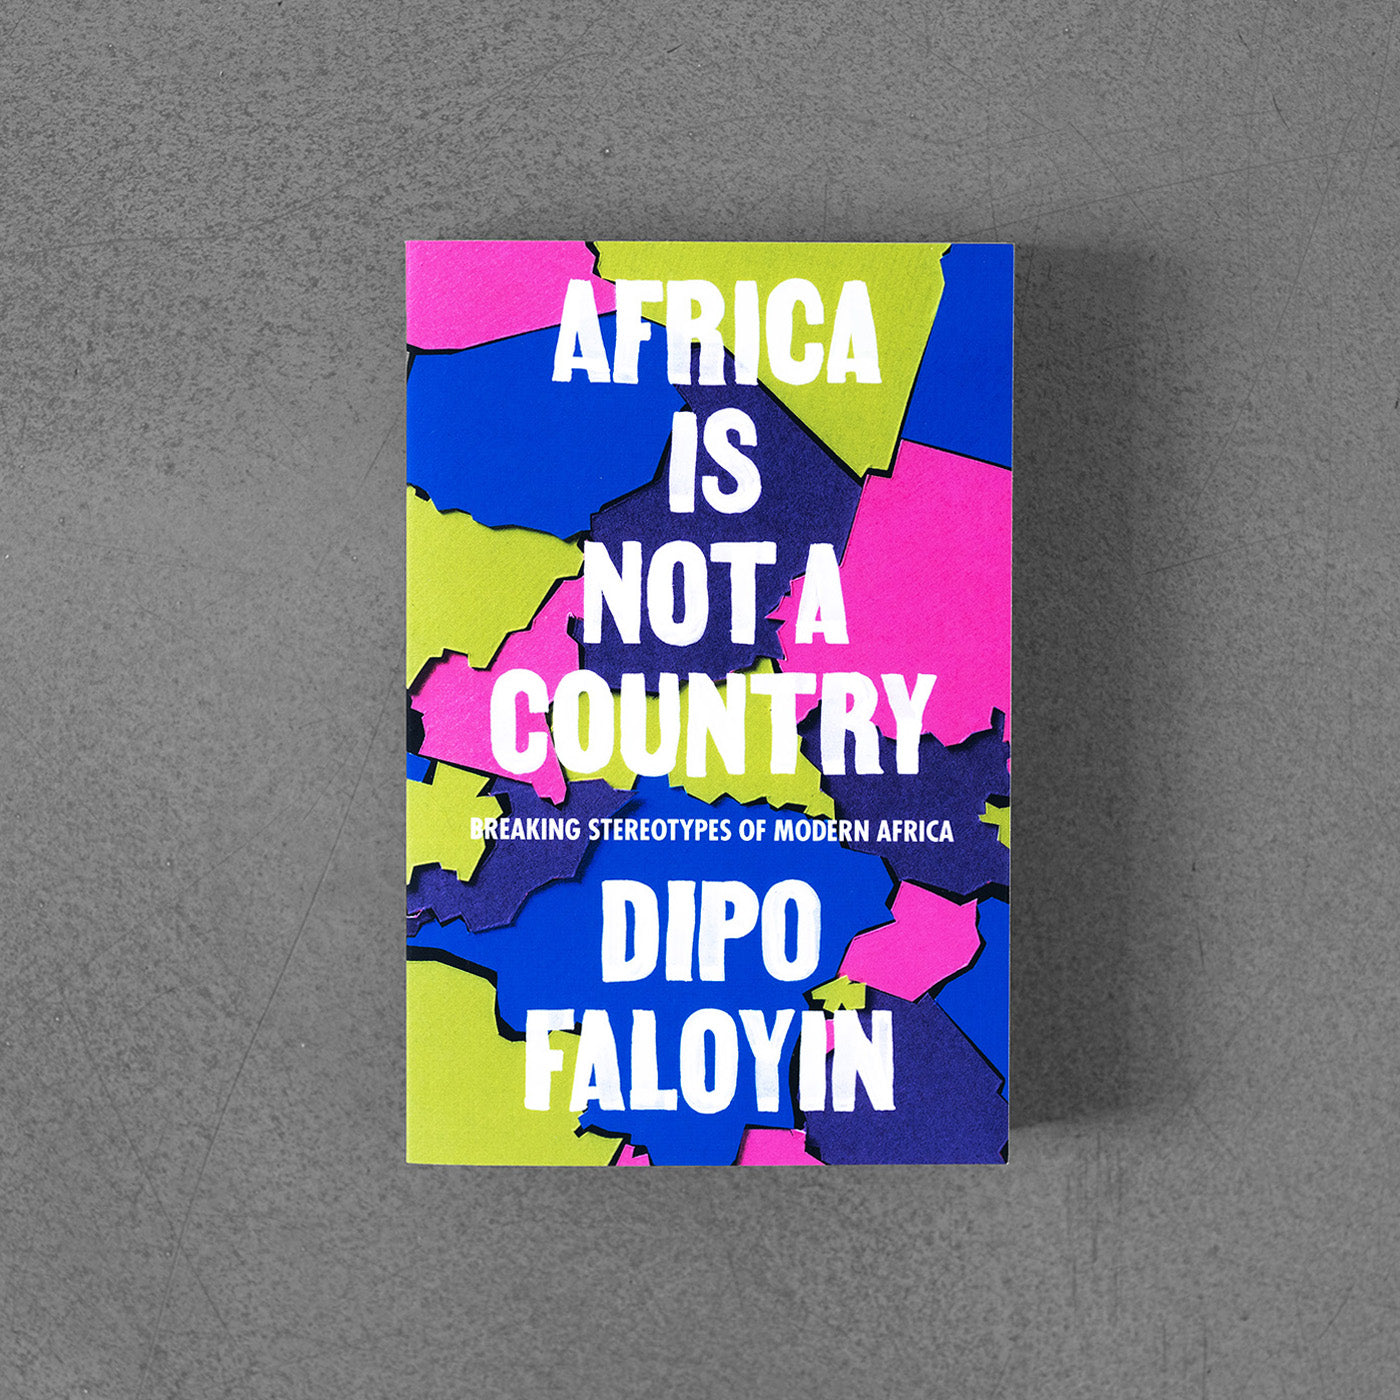 Africa Is Not A Country: Breaking Stereotypes of Modern Africa